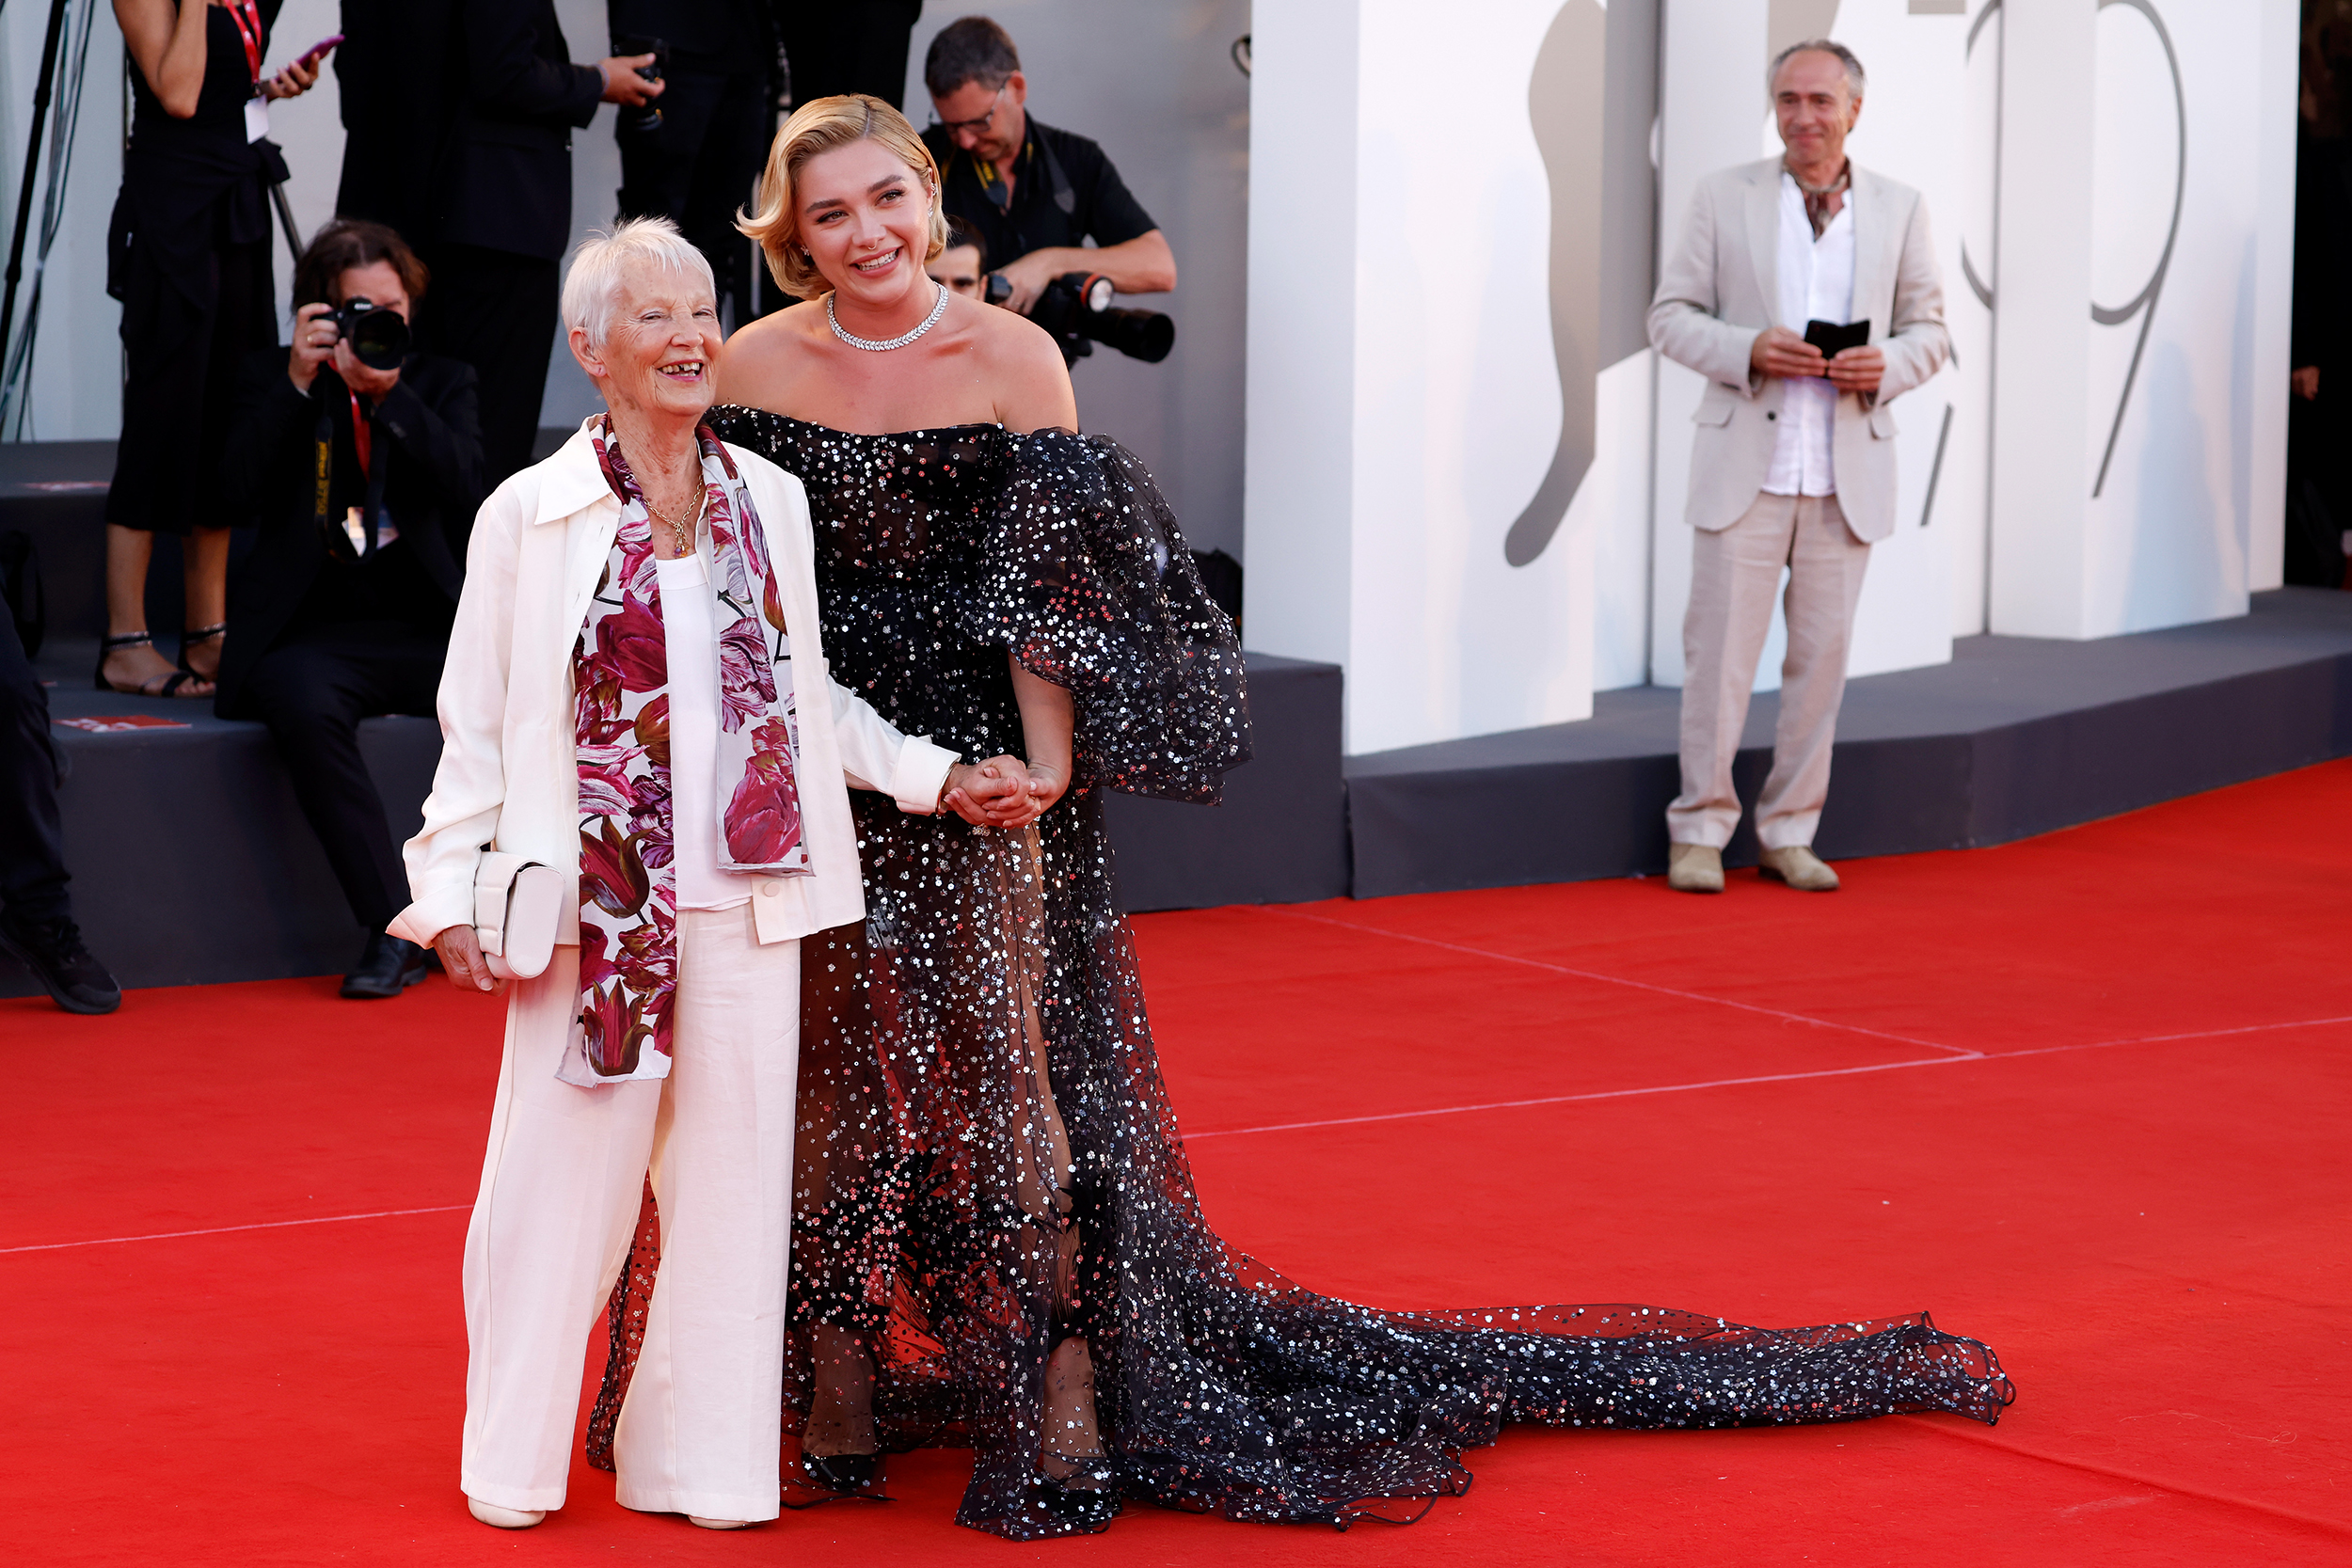 Florence Pugh with her grandmother 'Granzo Pat' in the Venice Film Festival